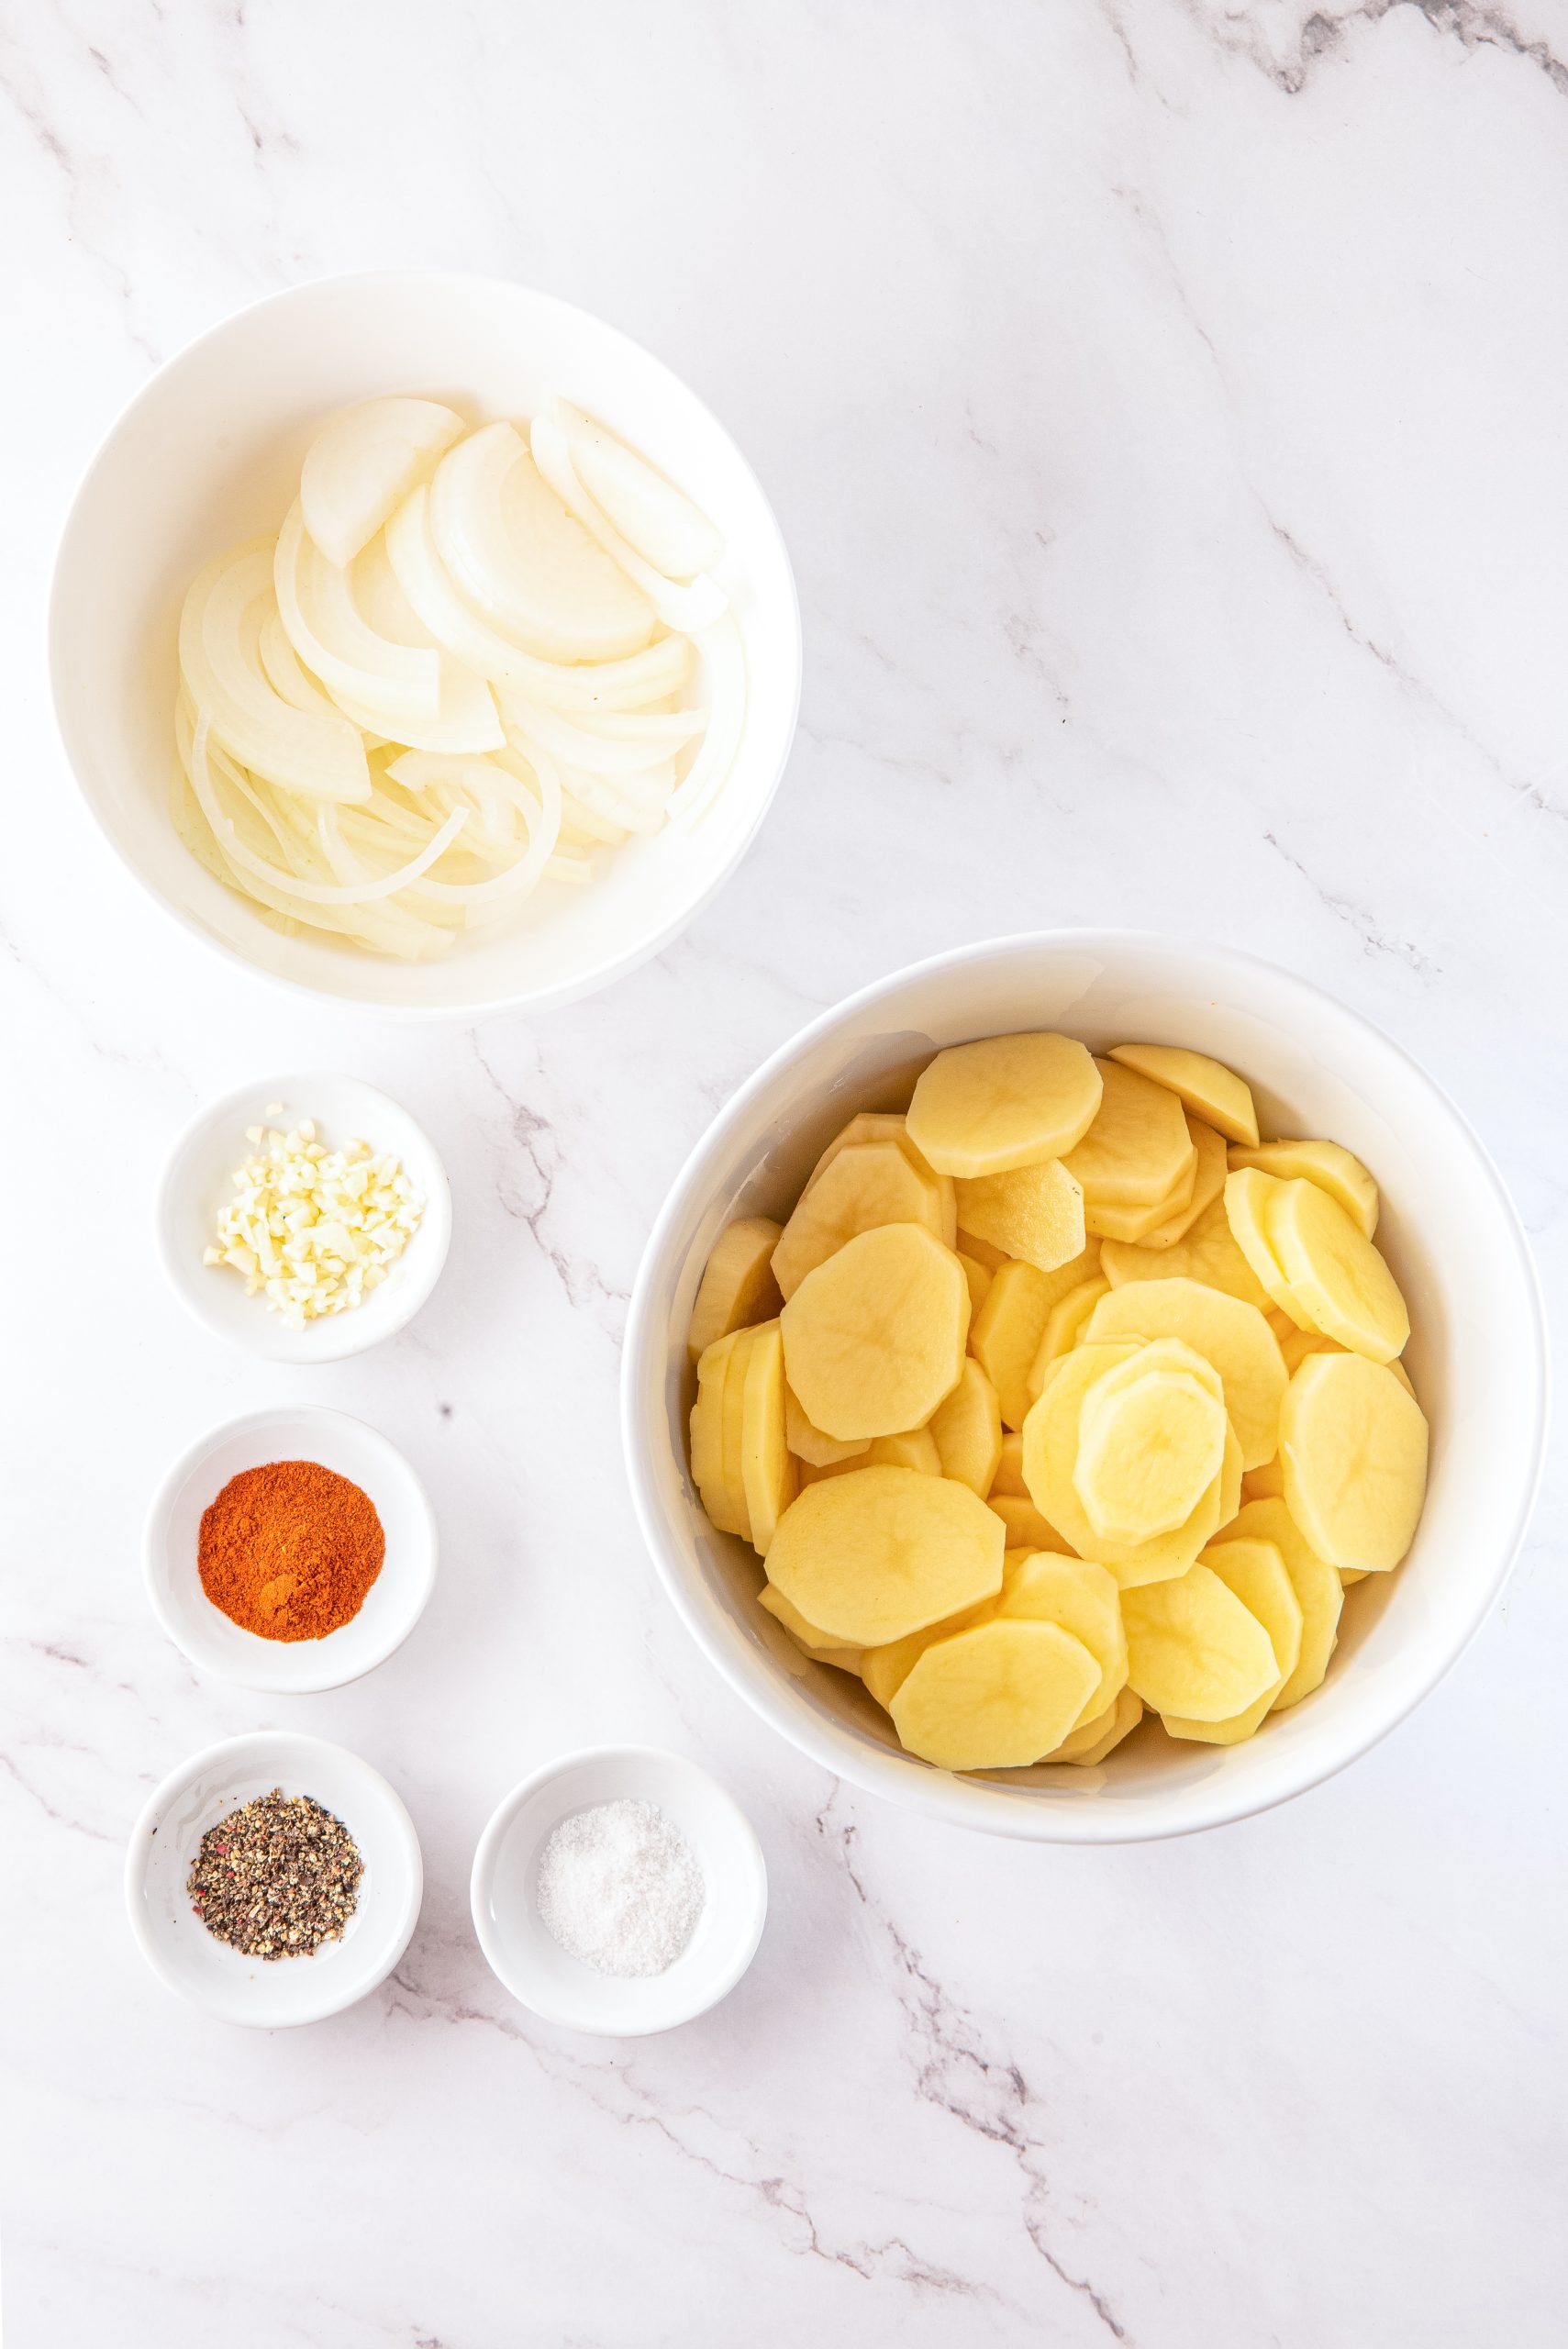 Ingredients to Smothered Potatoes
